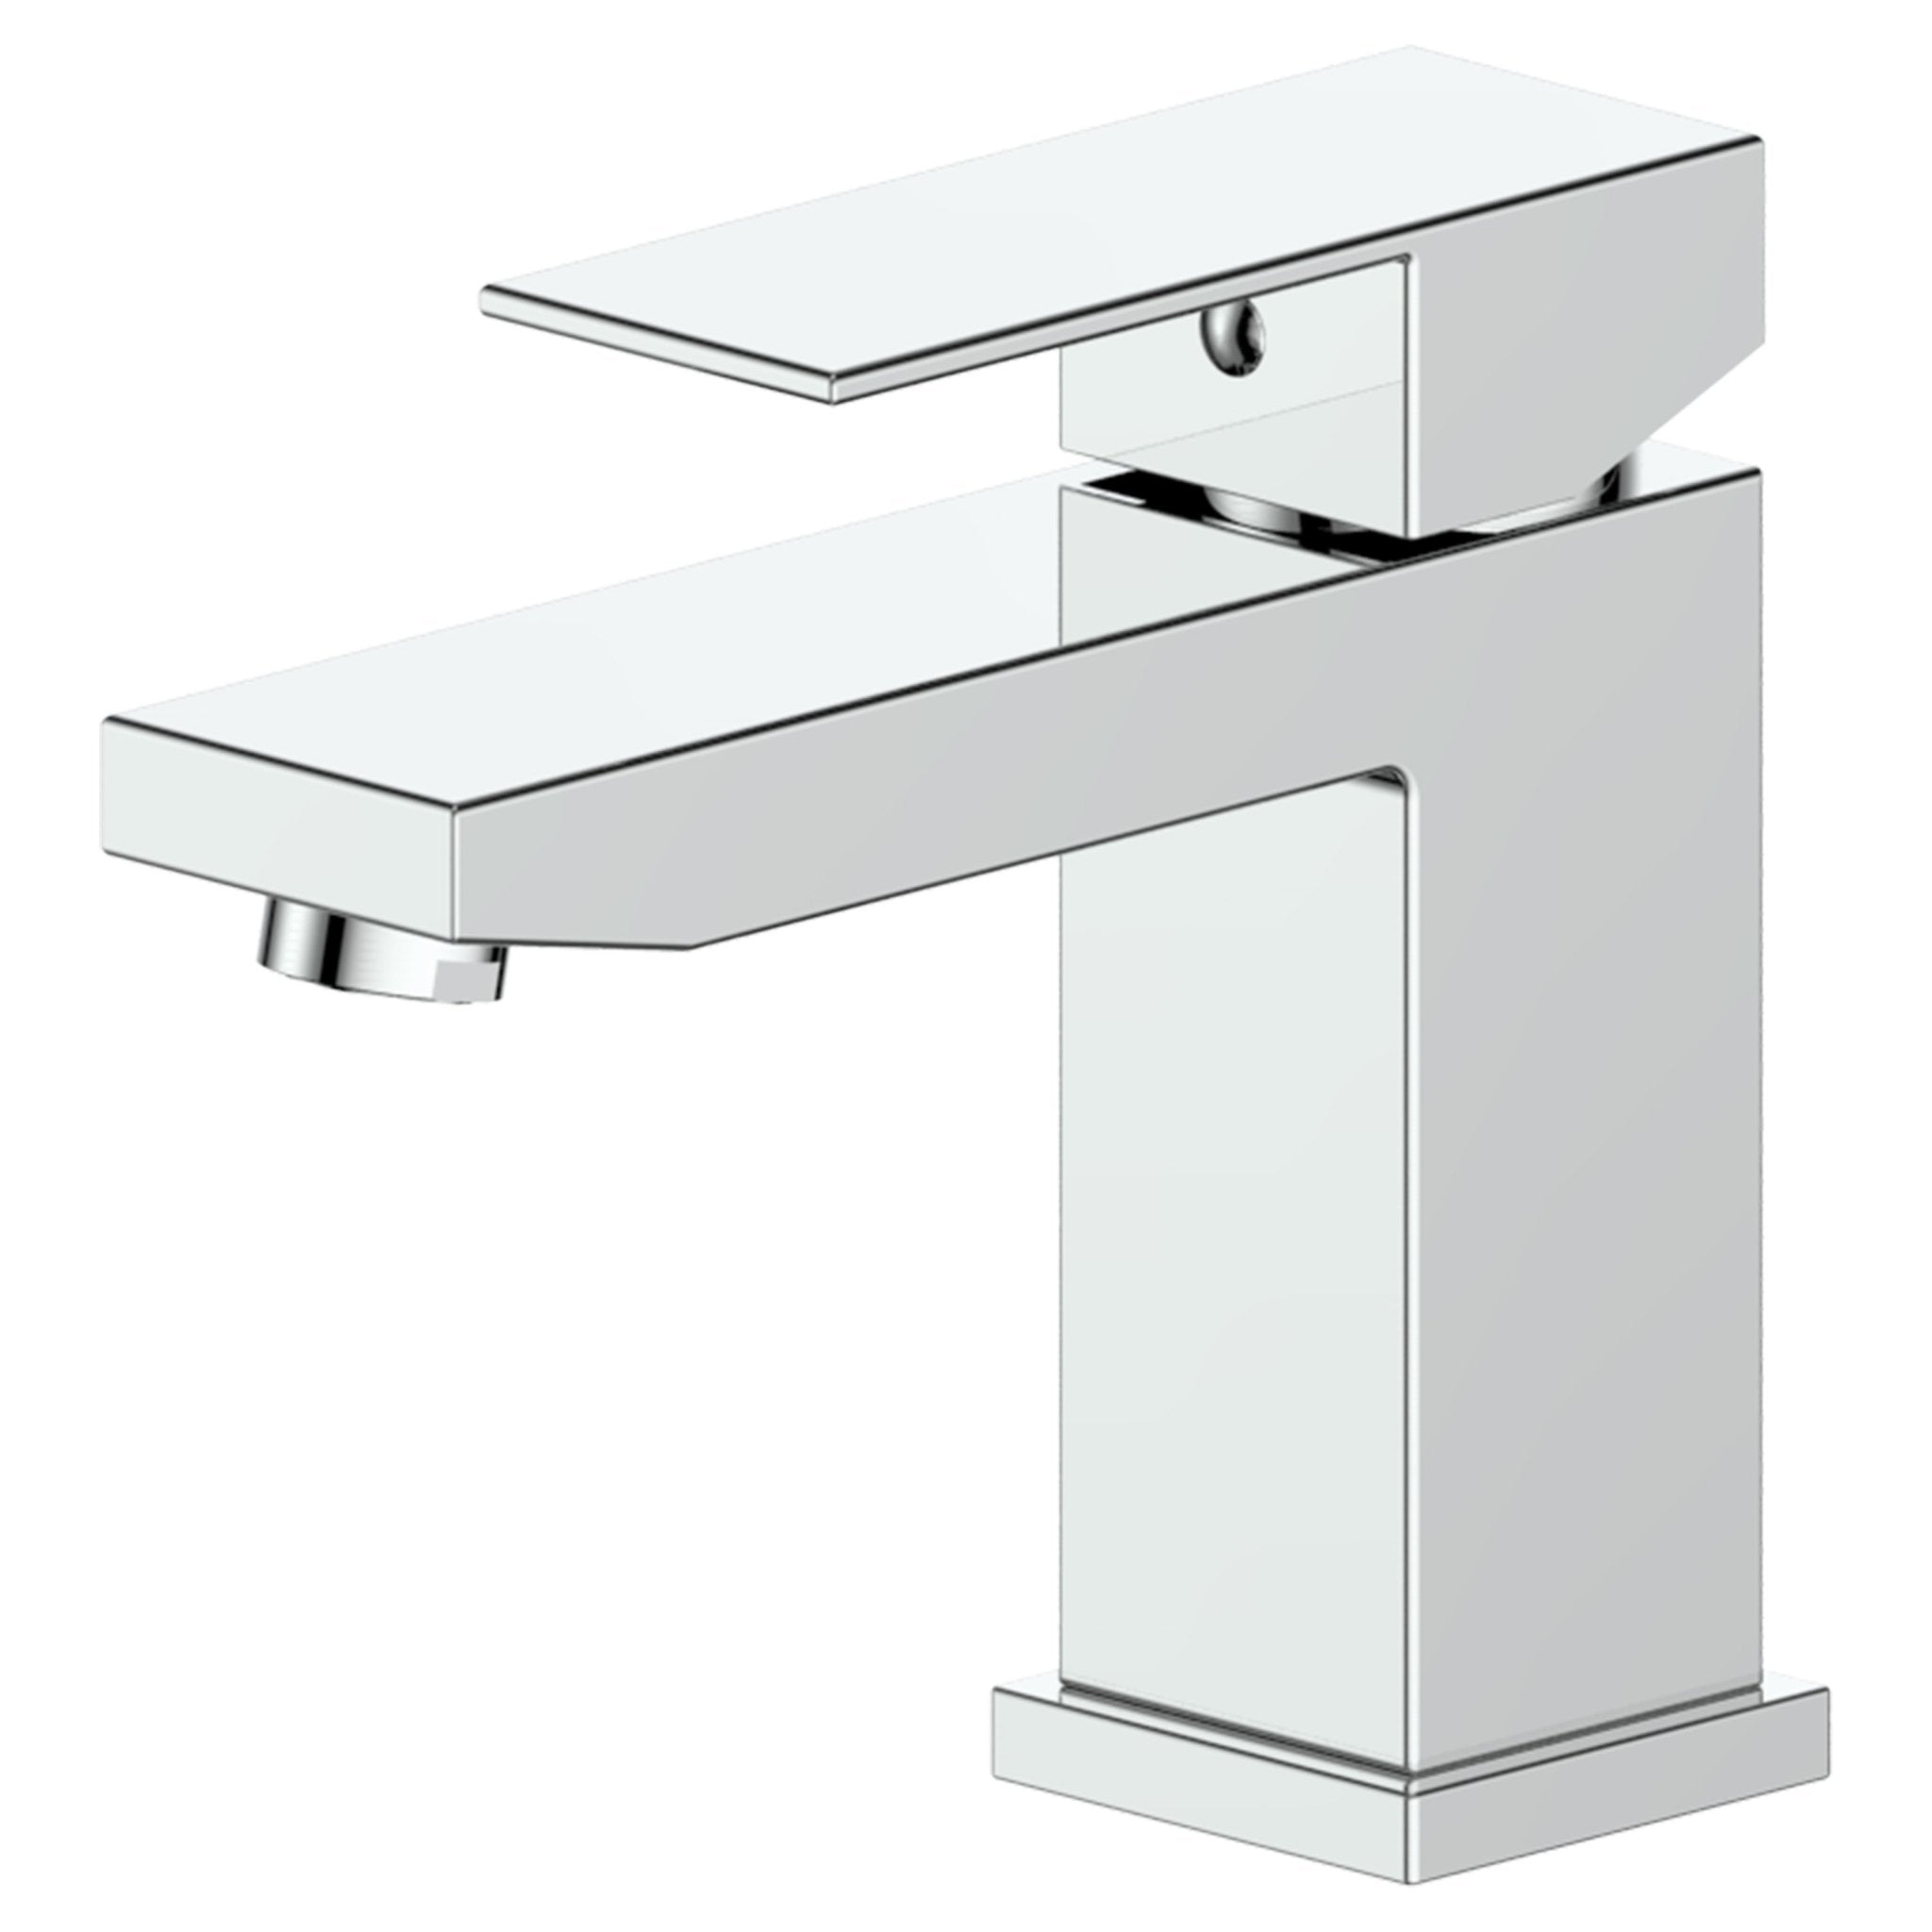 ZLINE North Lake Bath Faucet with Color Options (NTL-BF-GM)